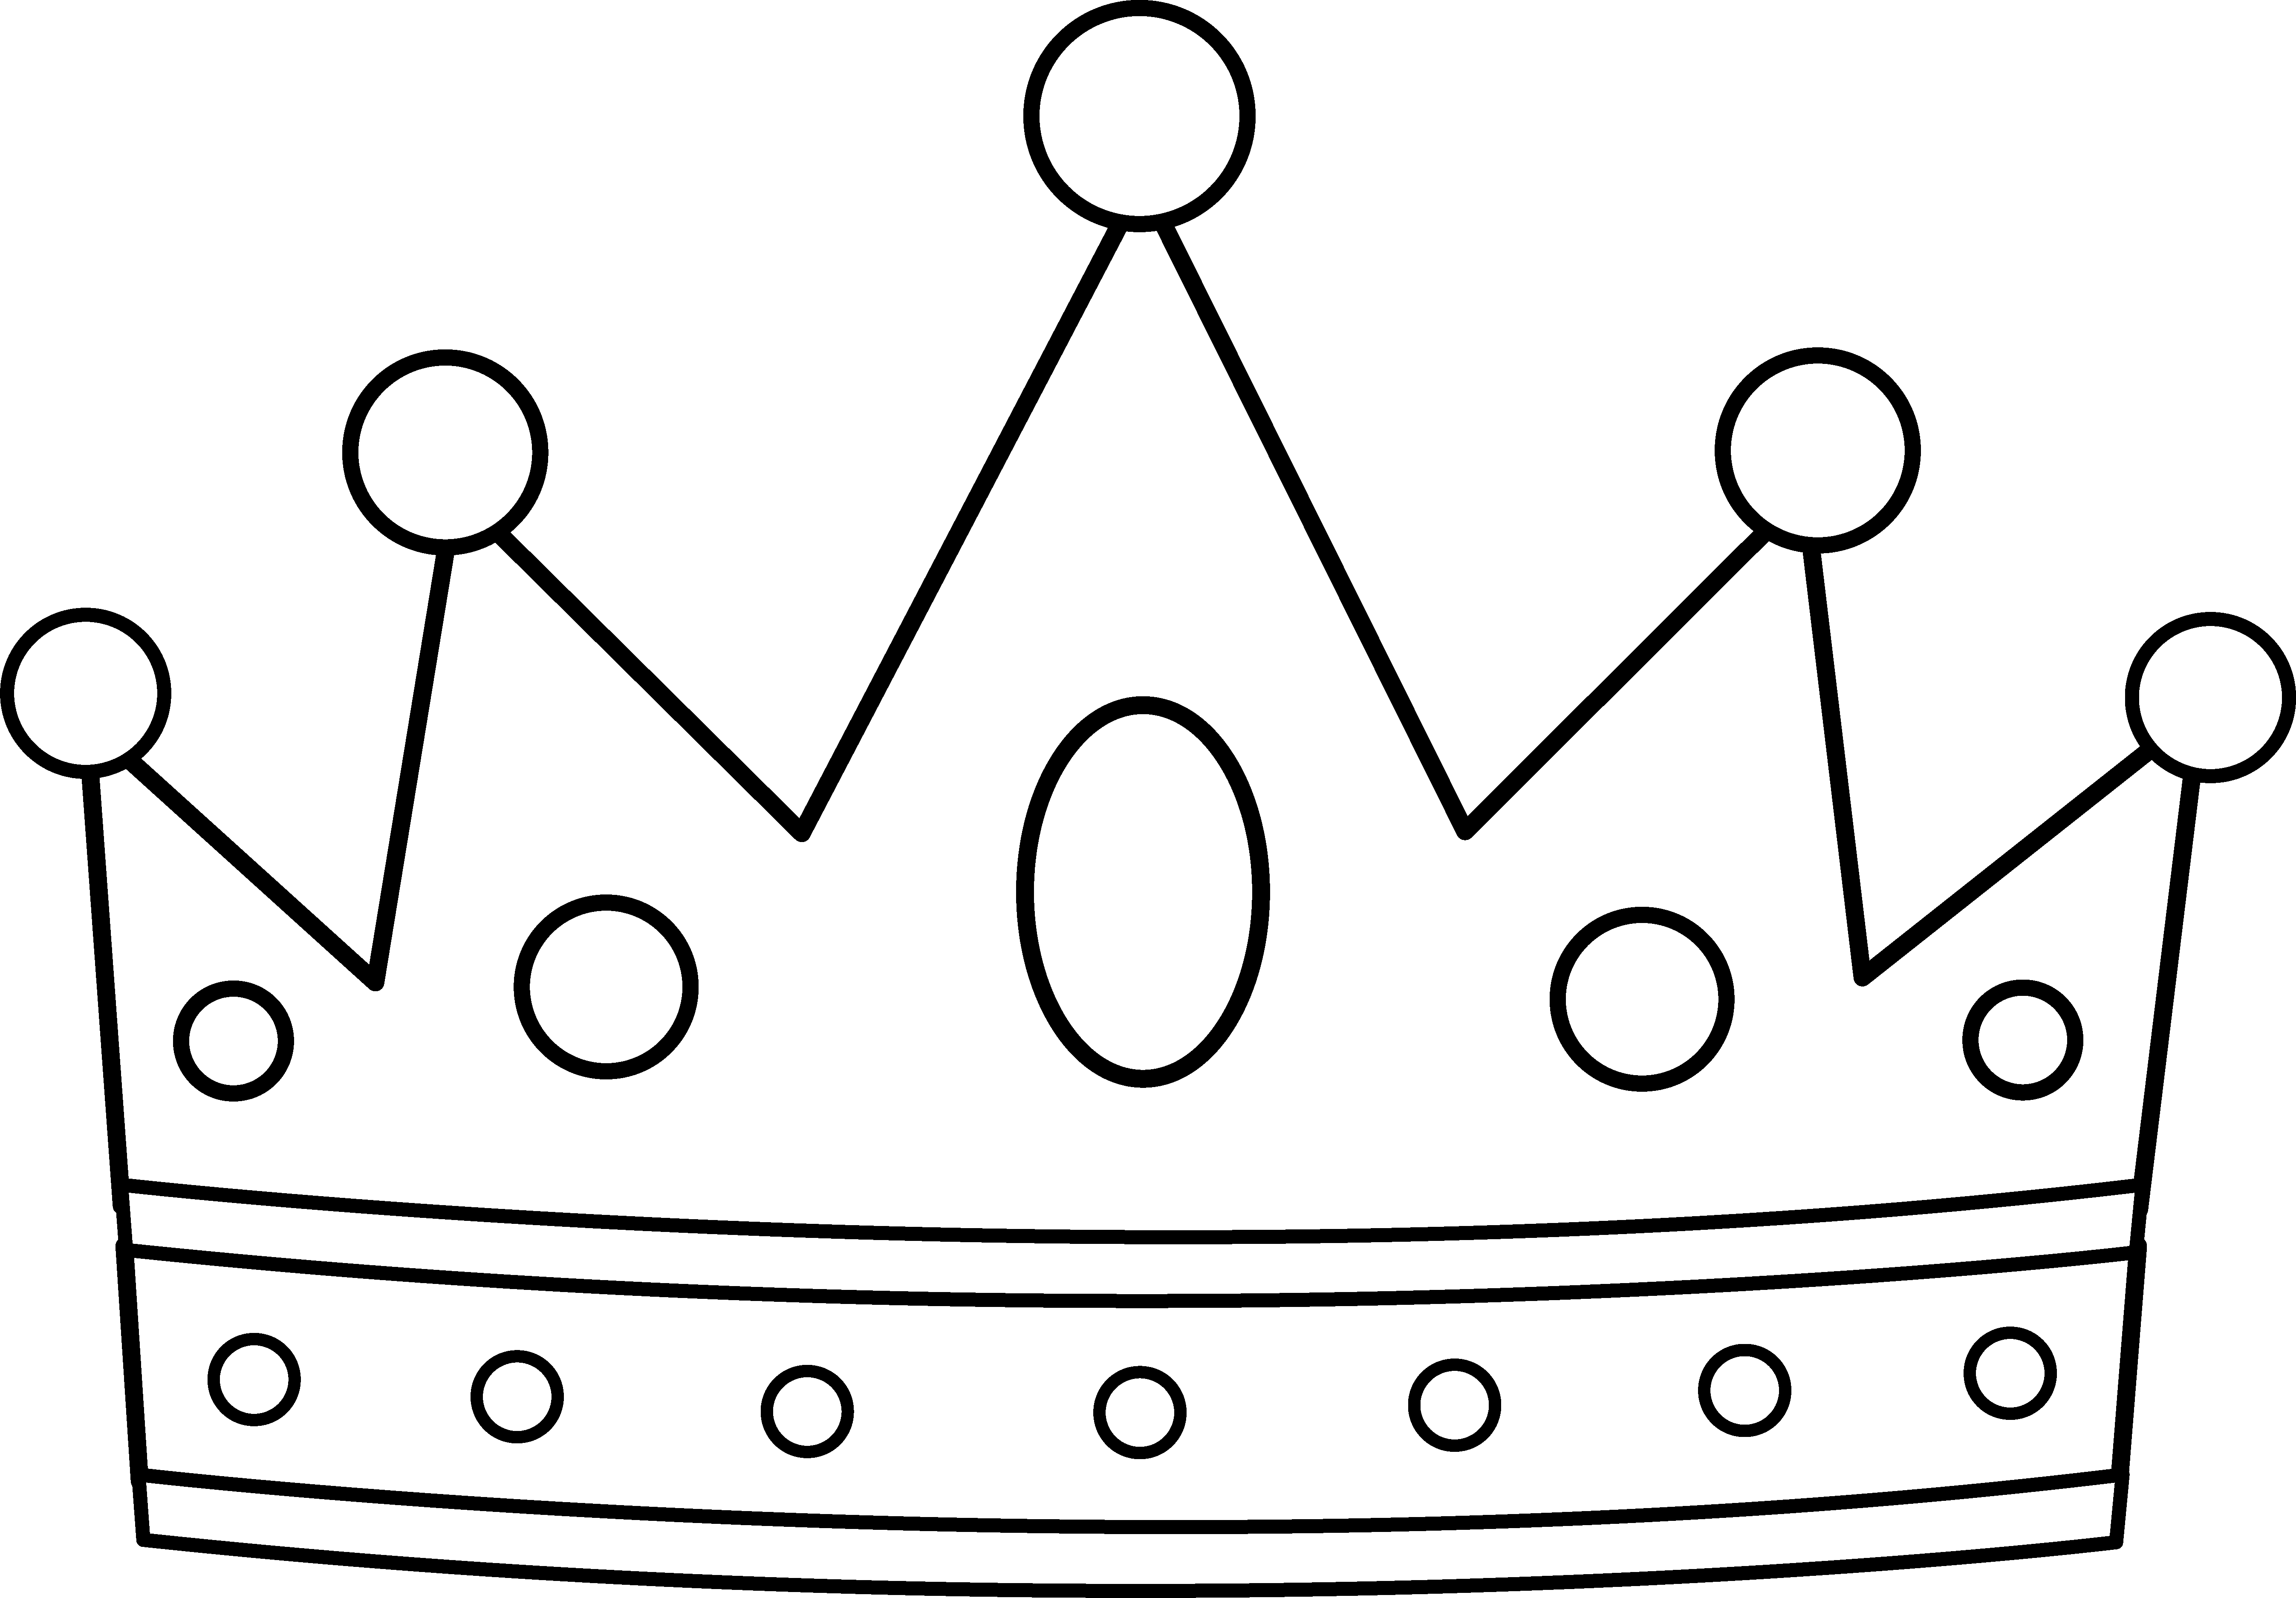 Black and white clipart crown